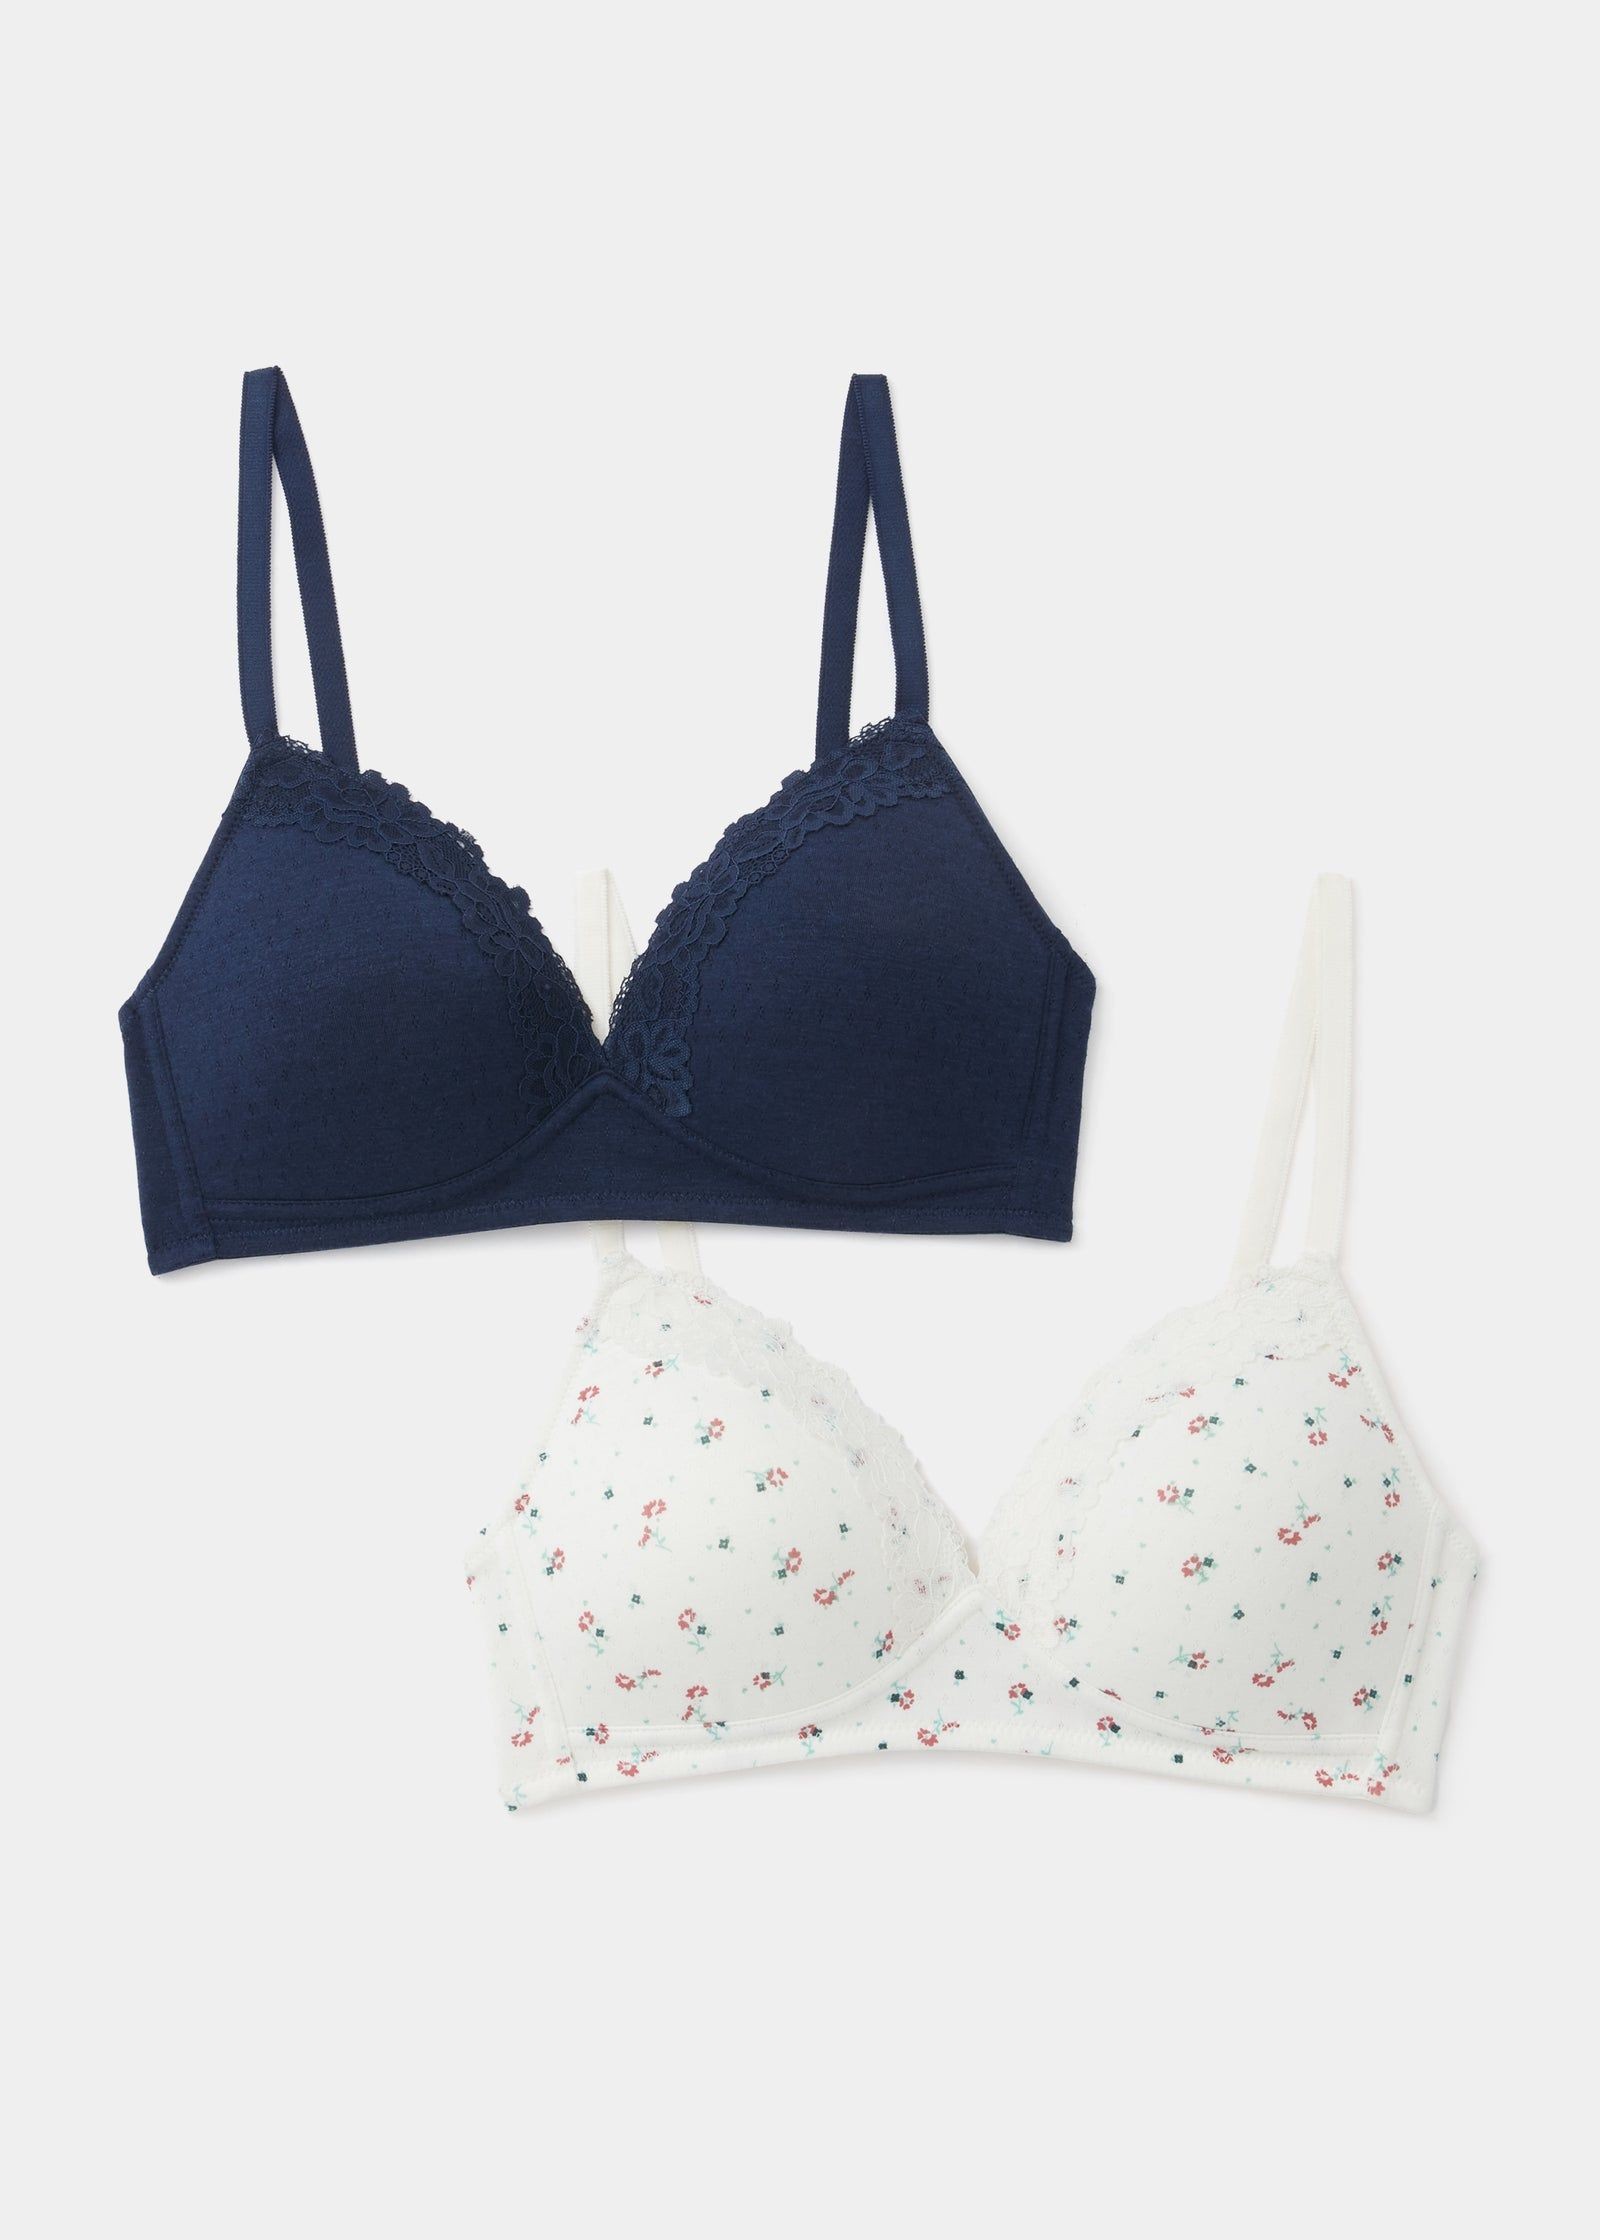 Buy Womens Bras at Lowest Price in Qatar